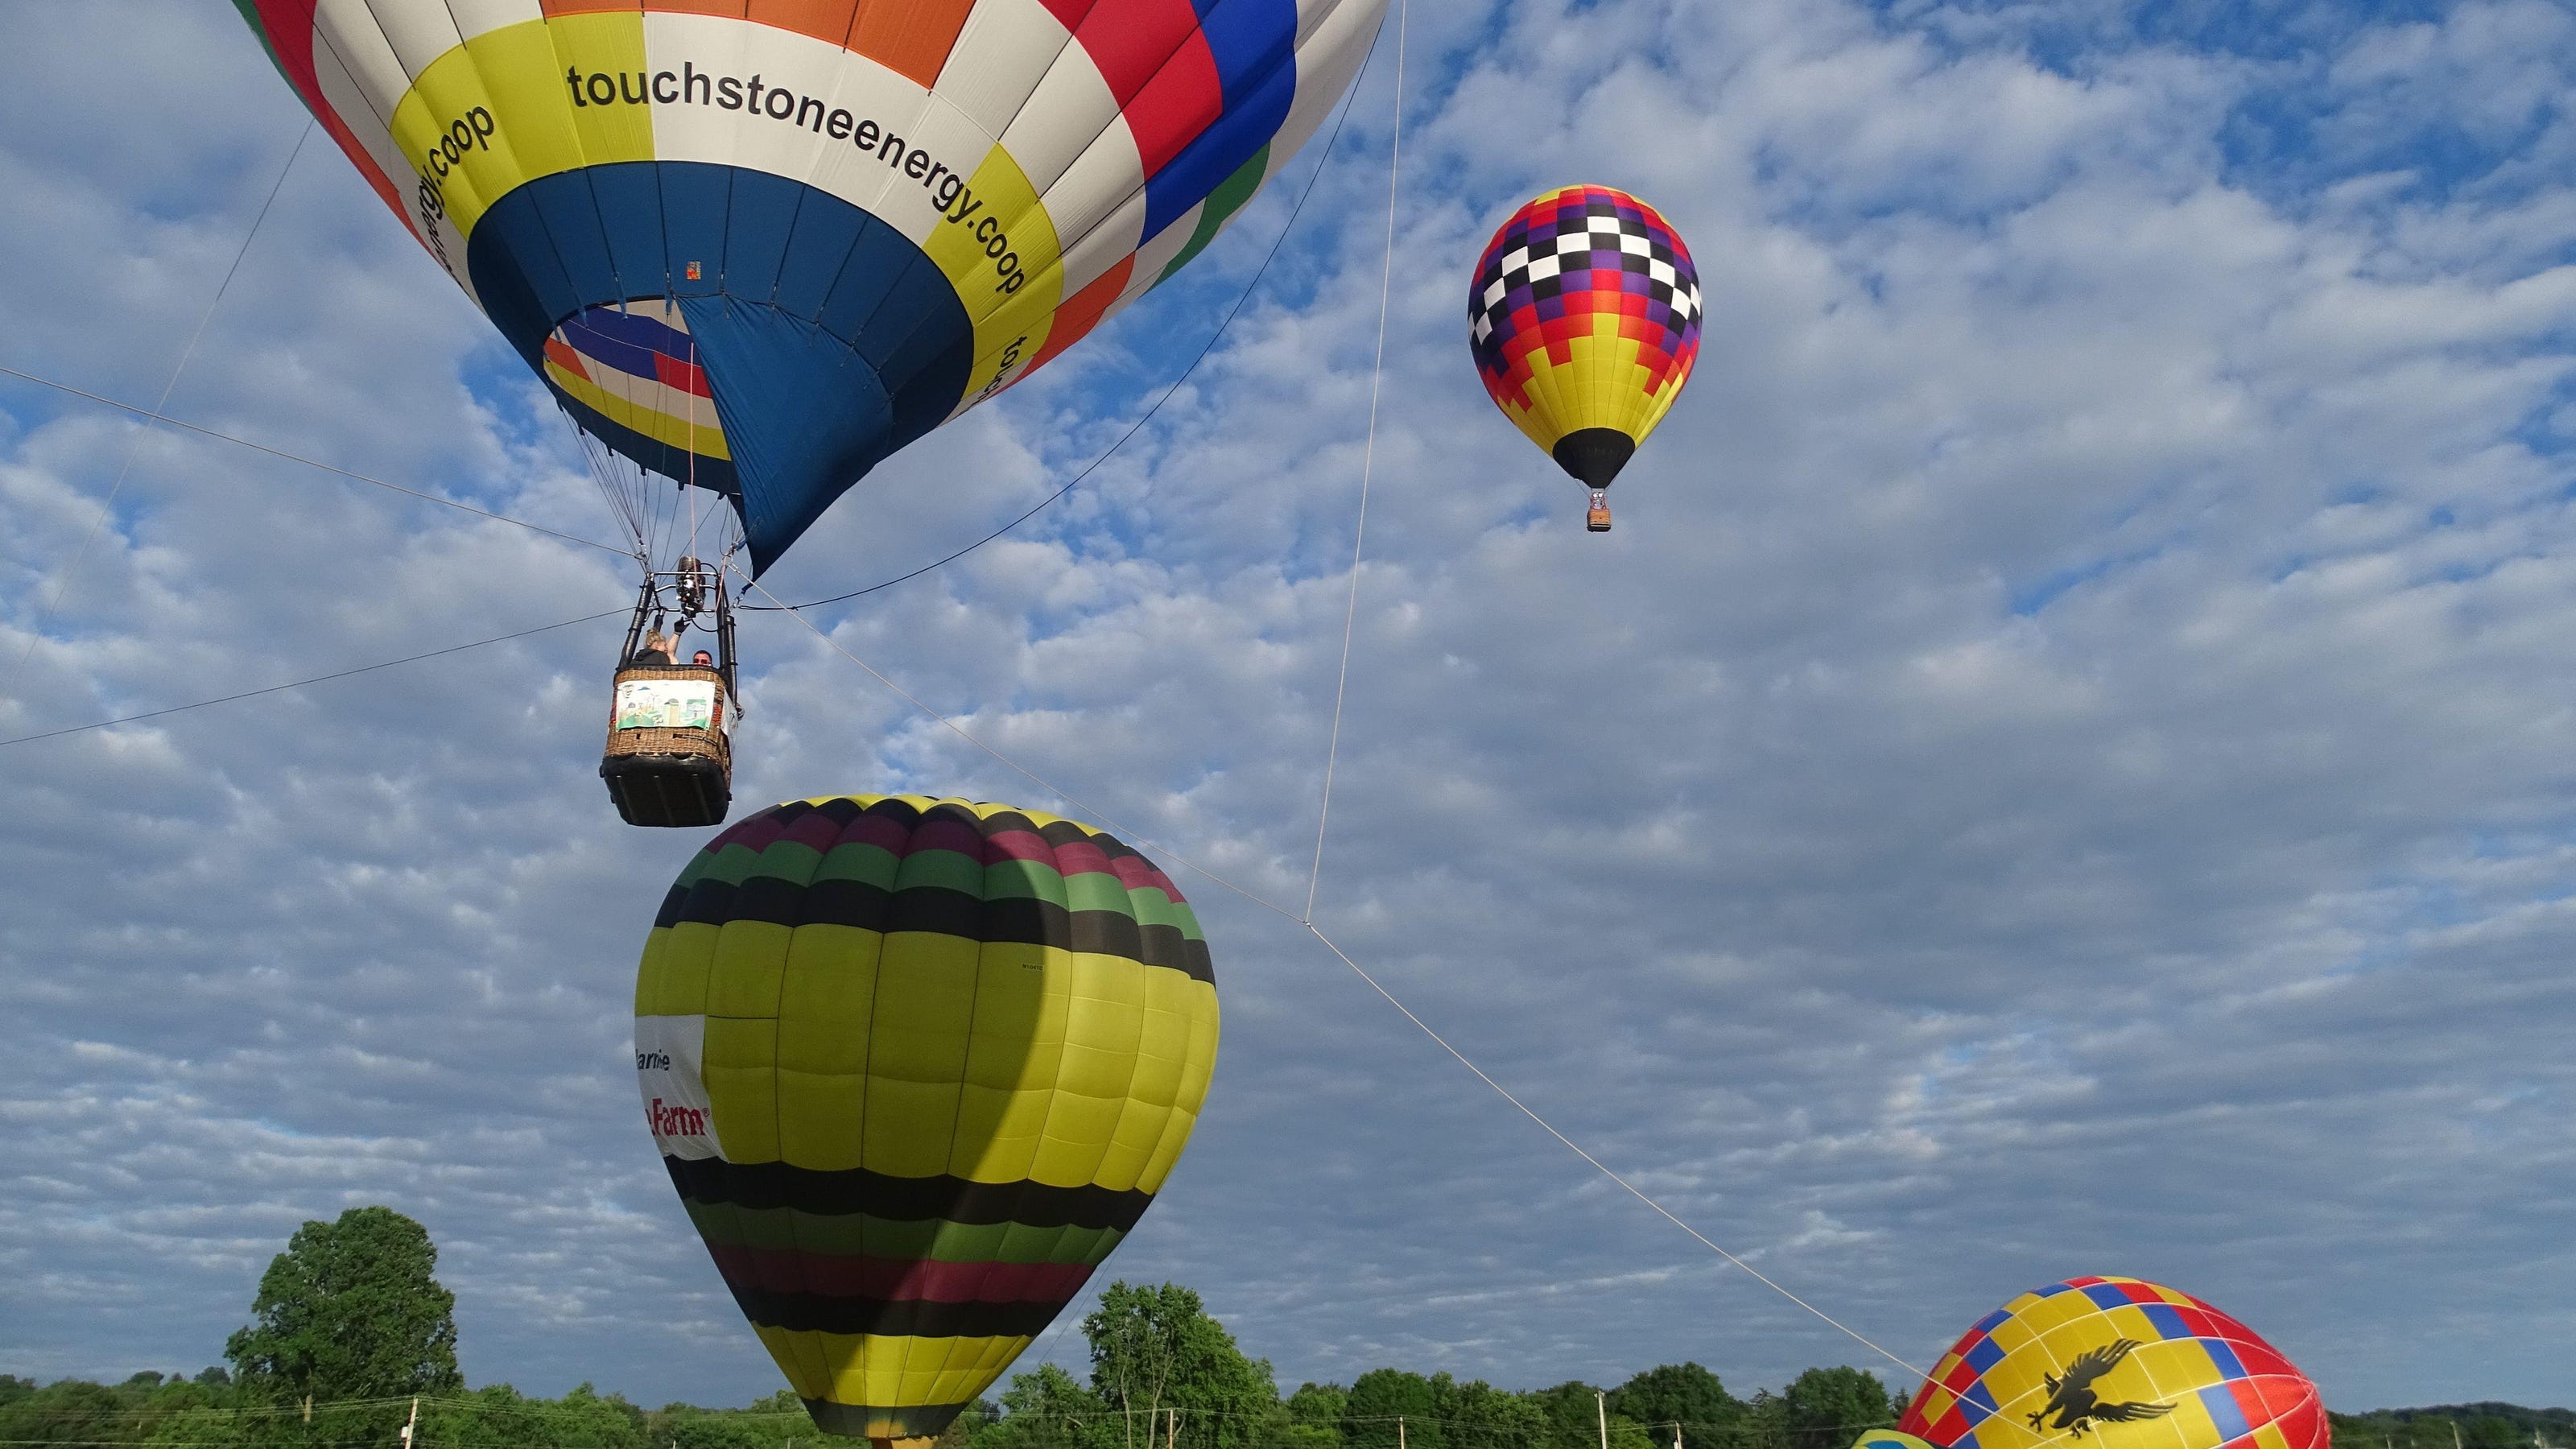 Coshocton Hot Air Balloon Festival returns after pandemic year off